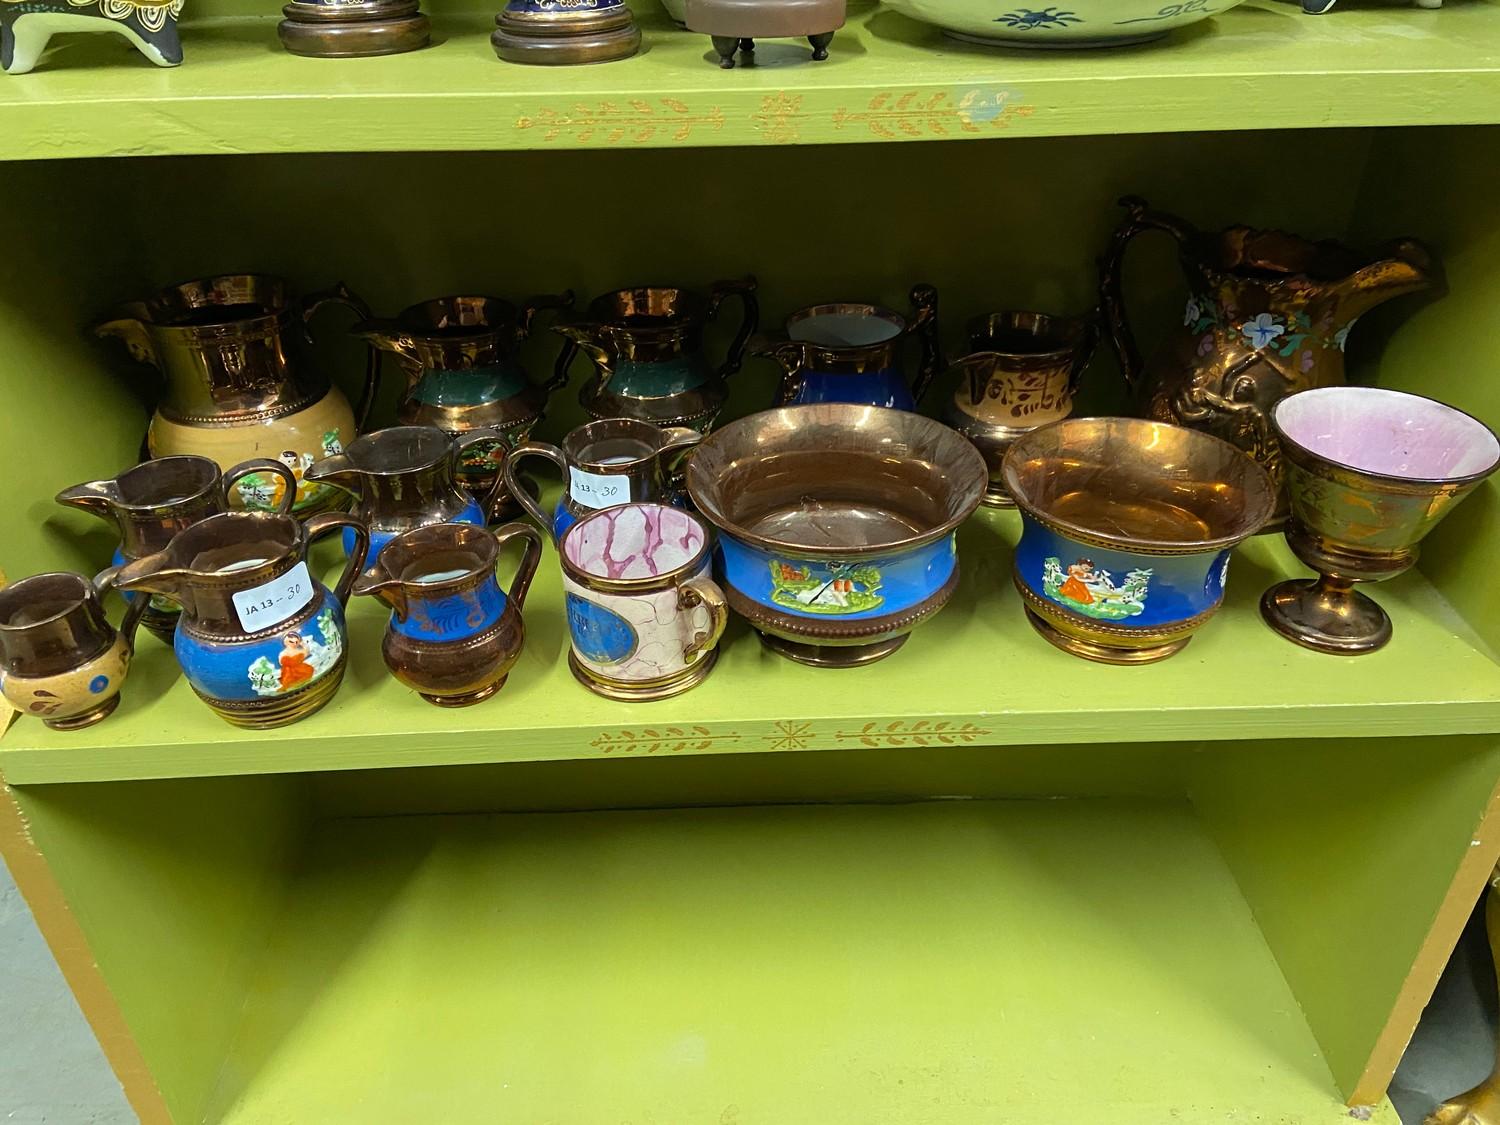 A Large quantity of Victorian lustre water jugs, creams and sugar bowls.